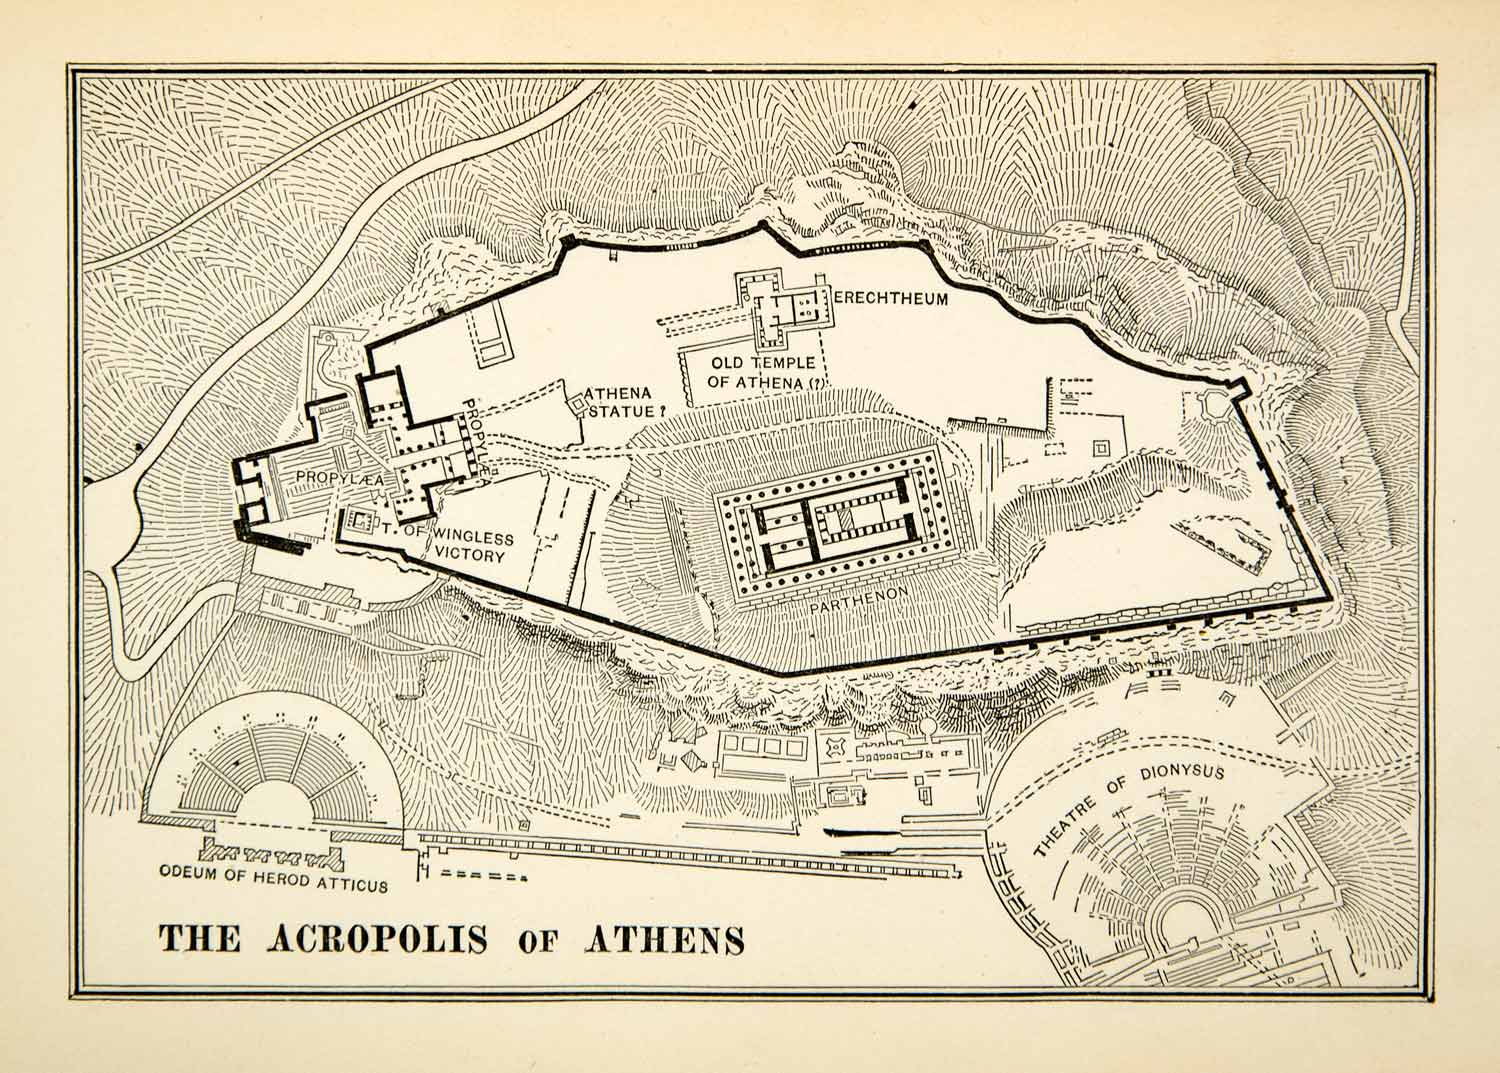 1900 Print Map Acropolis Athens Greece Architecture Layout Odeum Herod XEY8